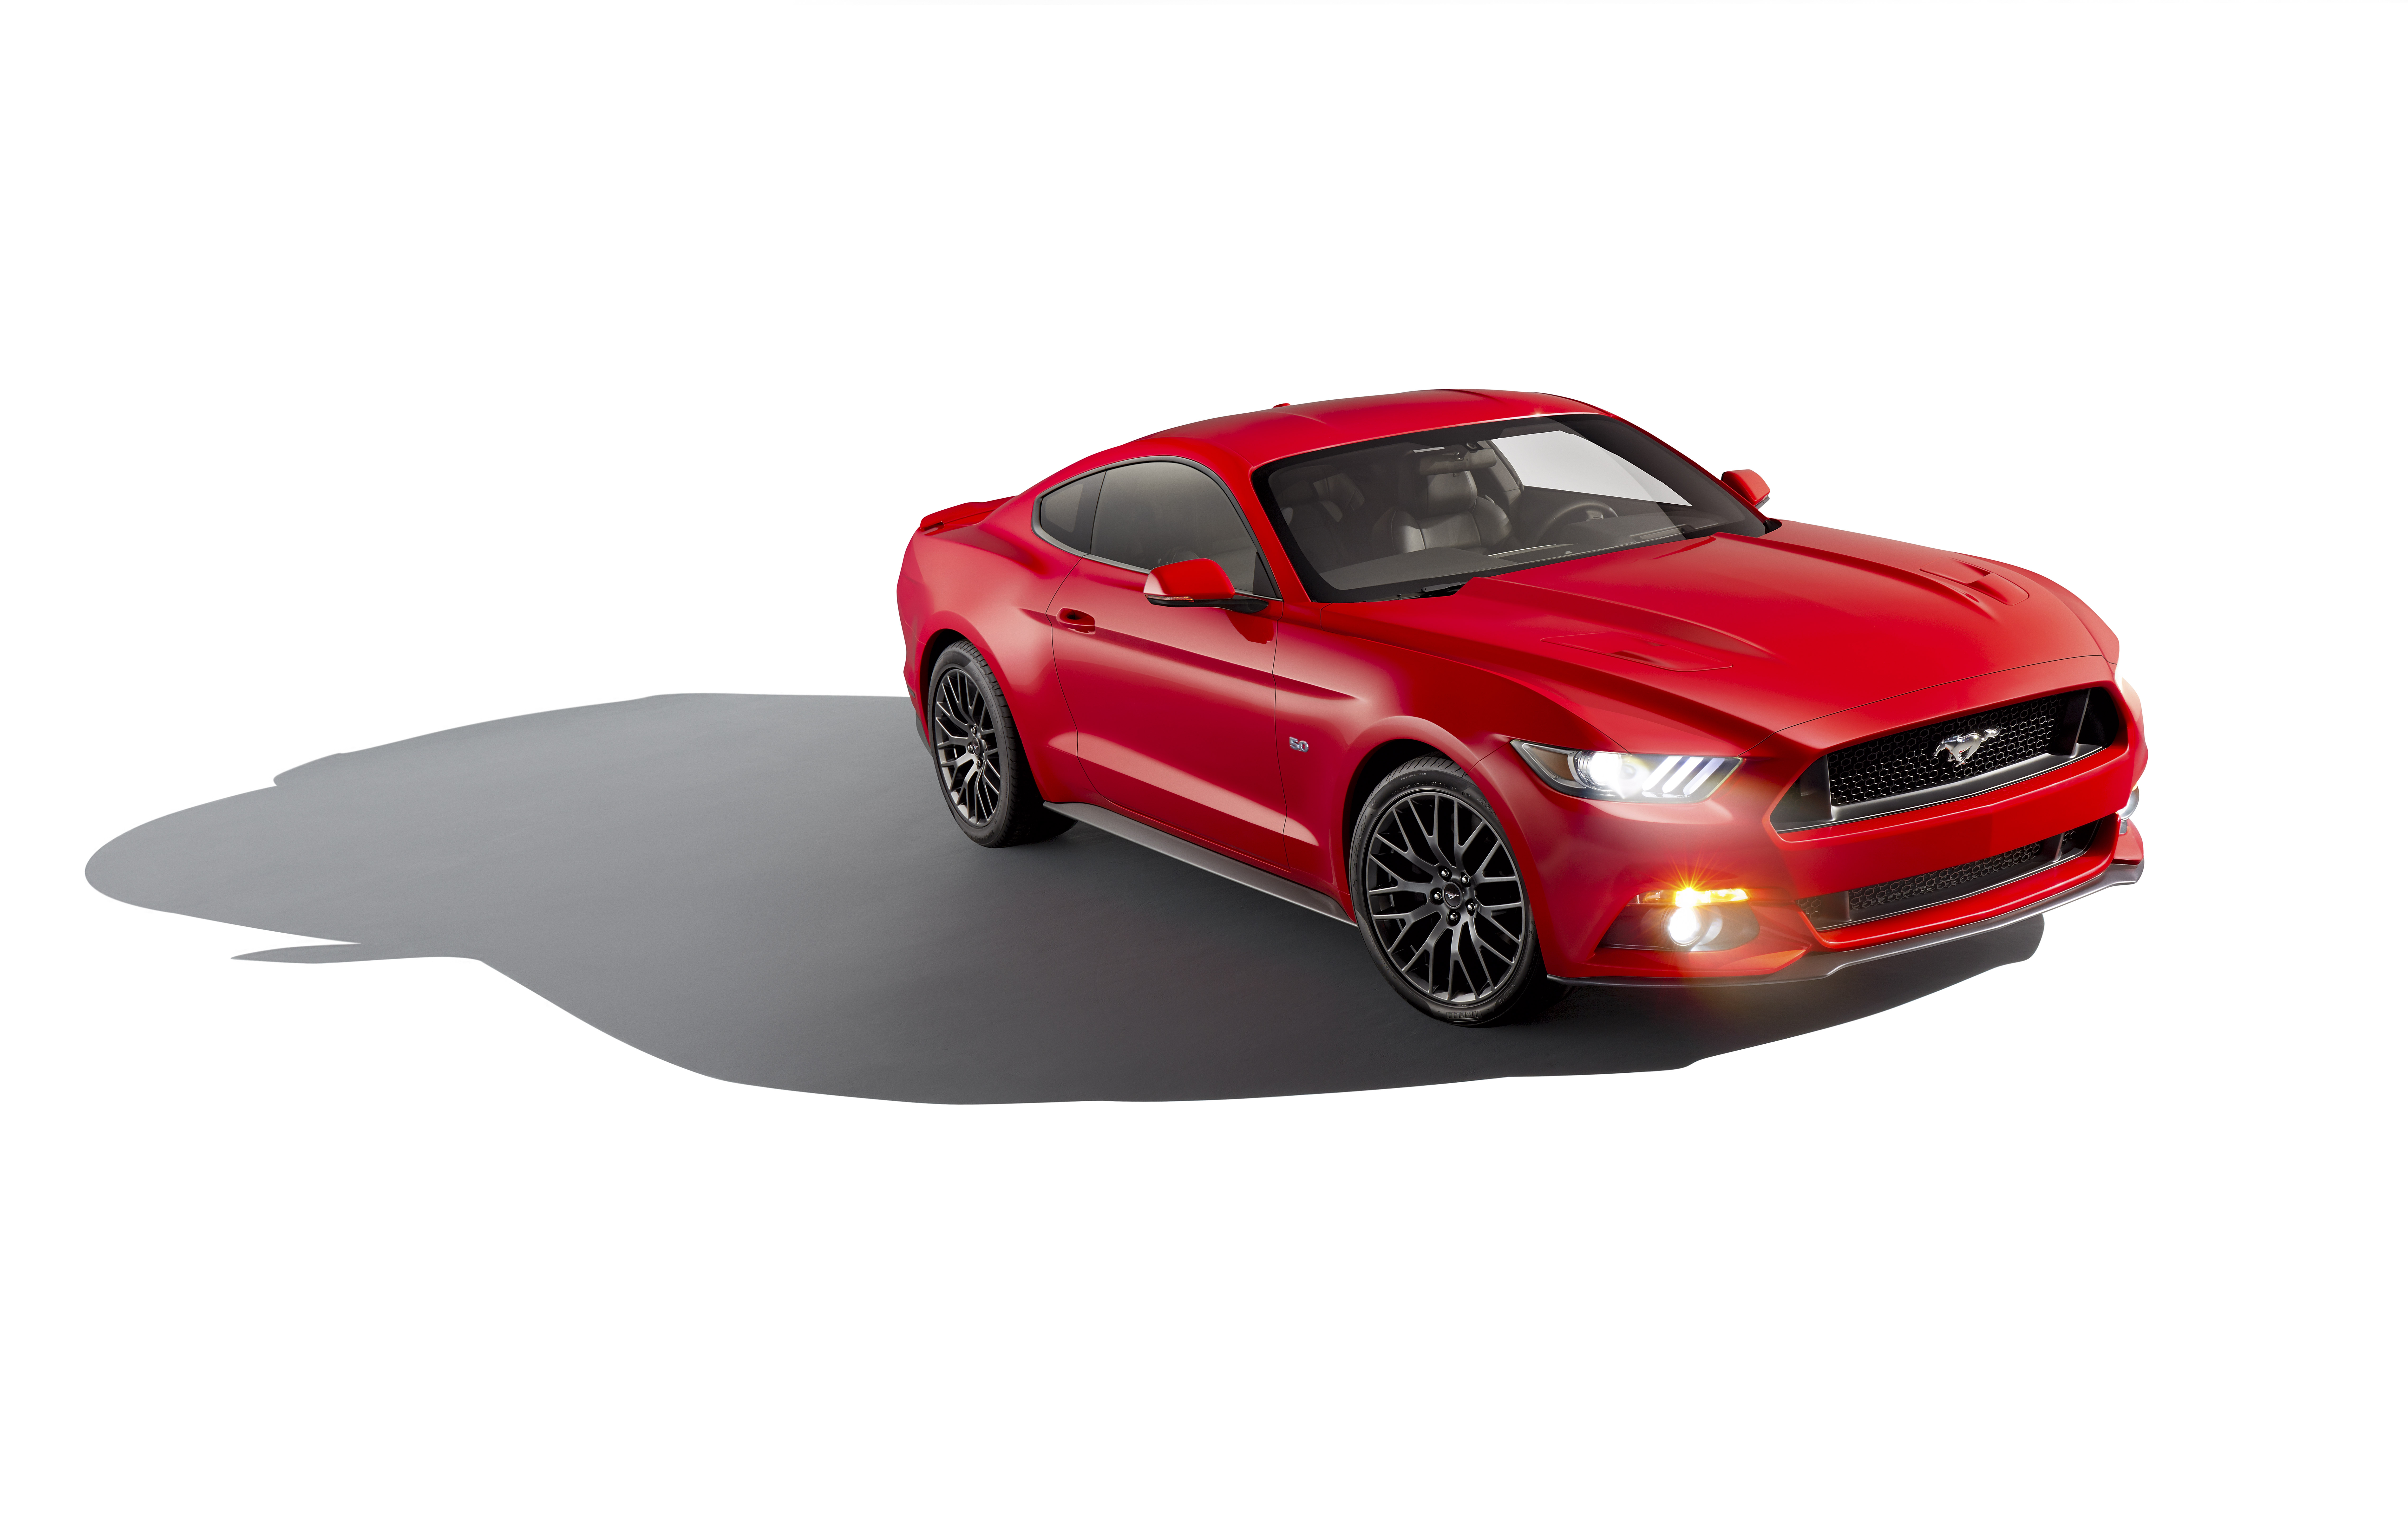 2015 Ford Mustang. Photo / Supplied